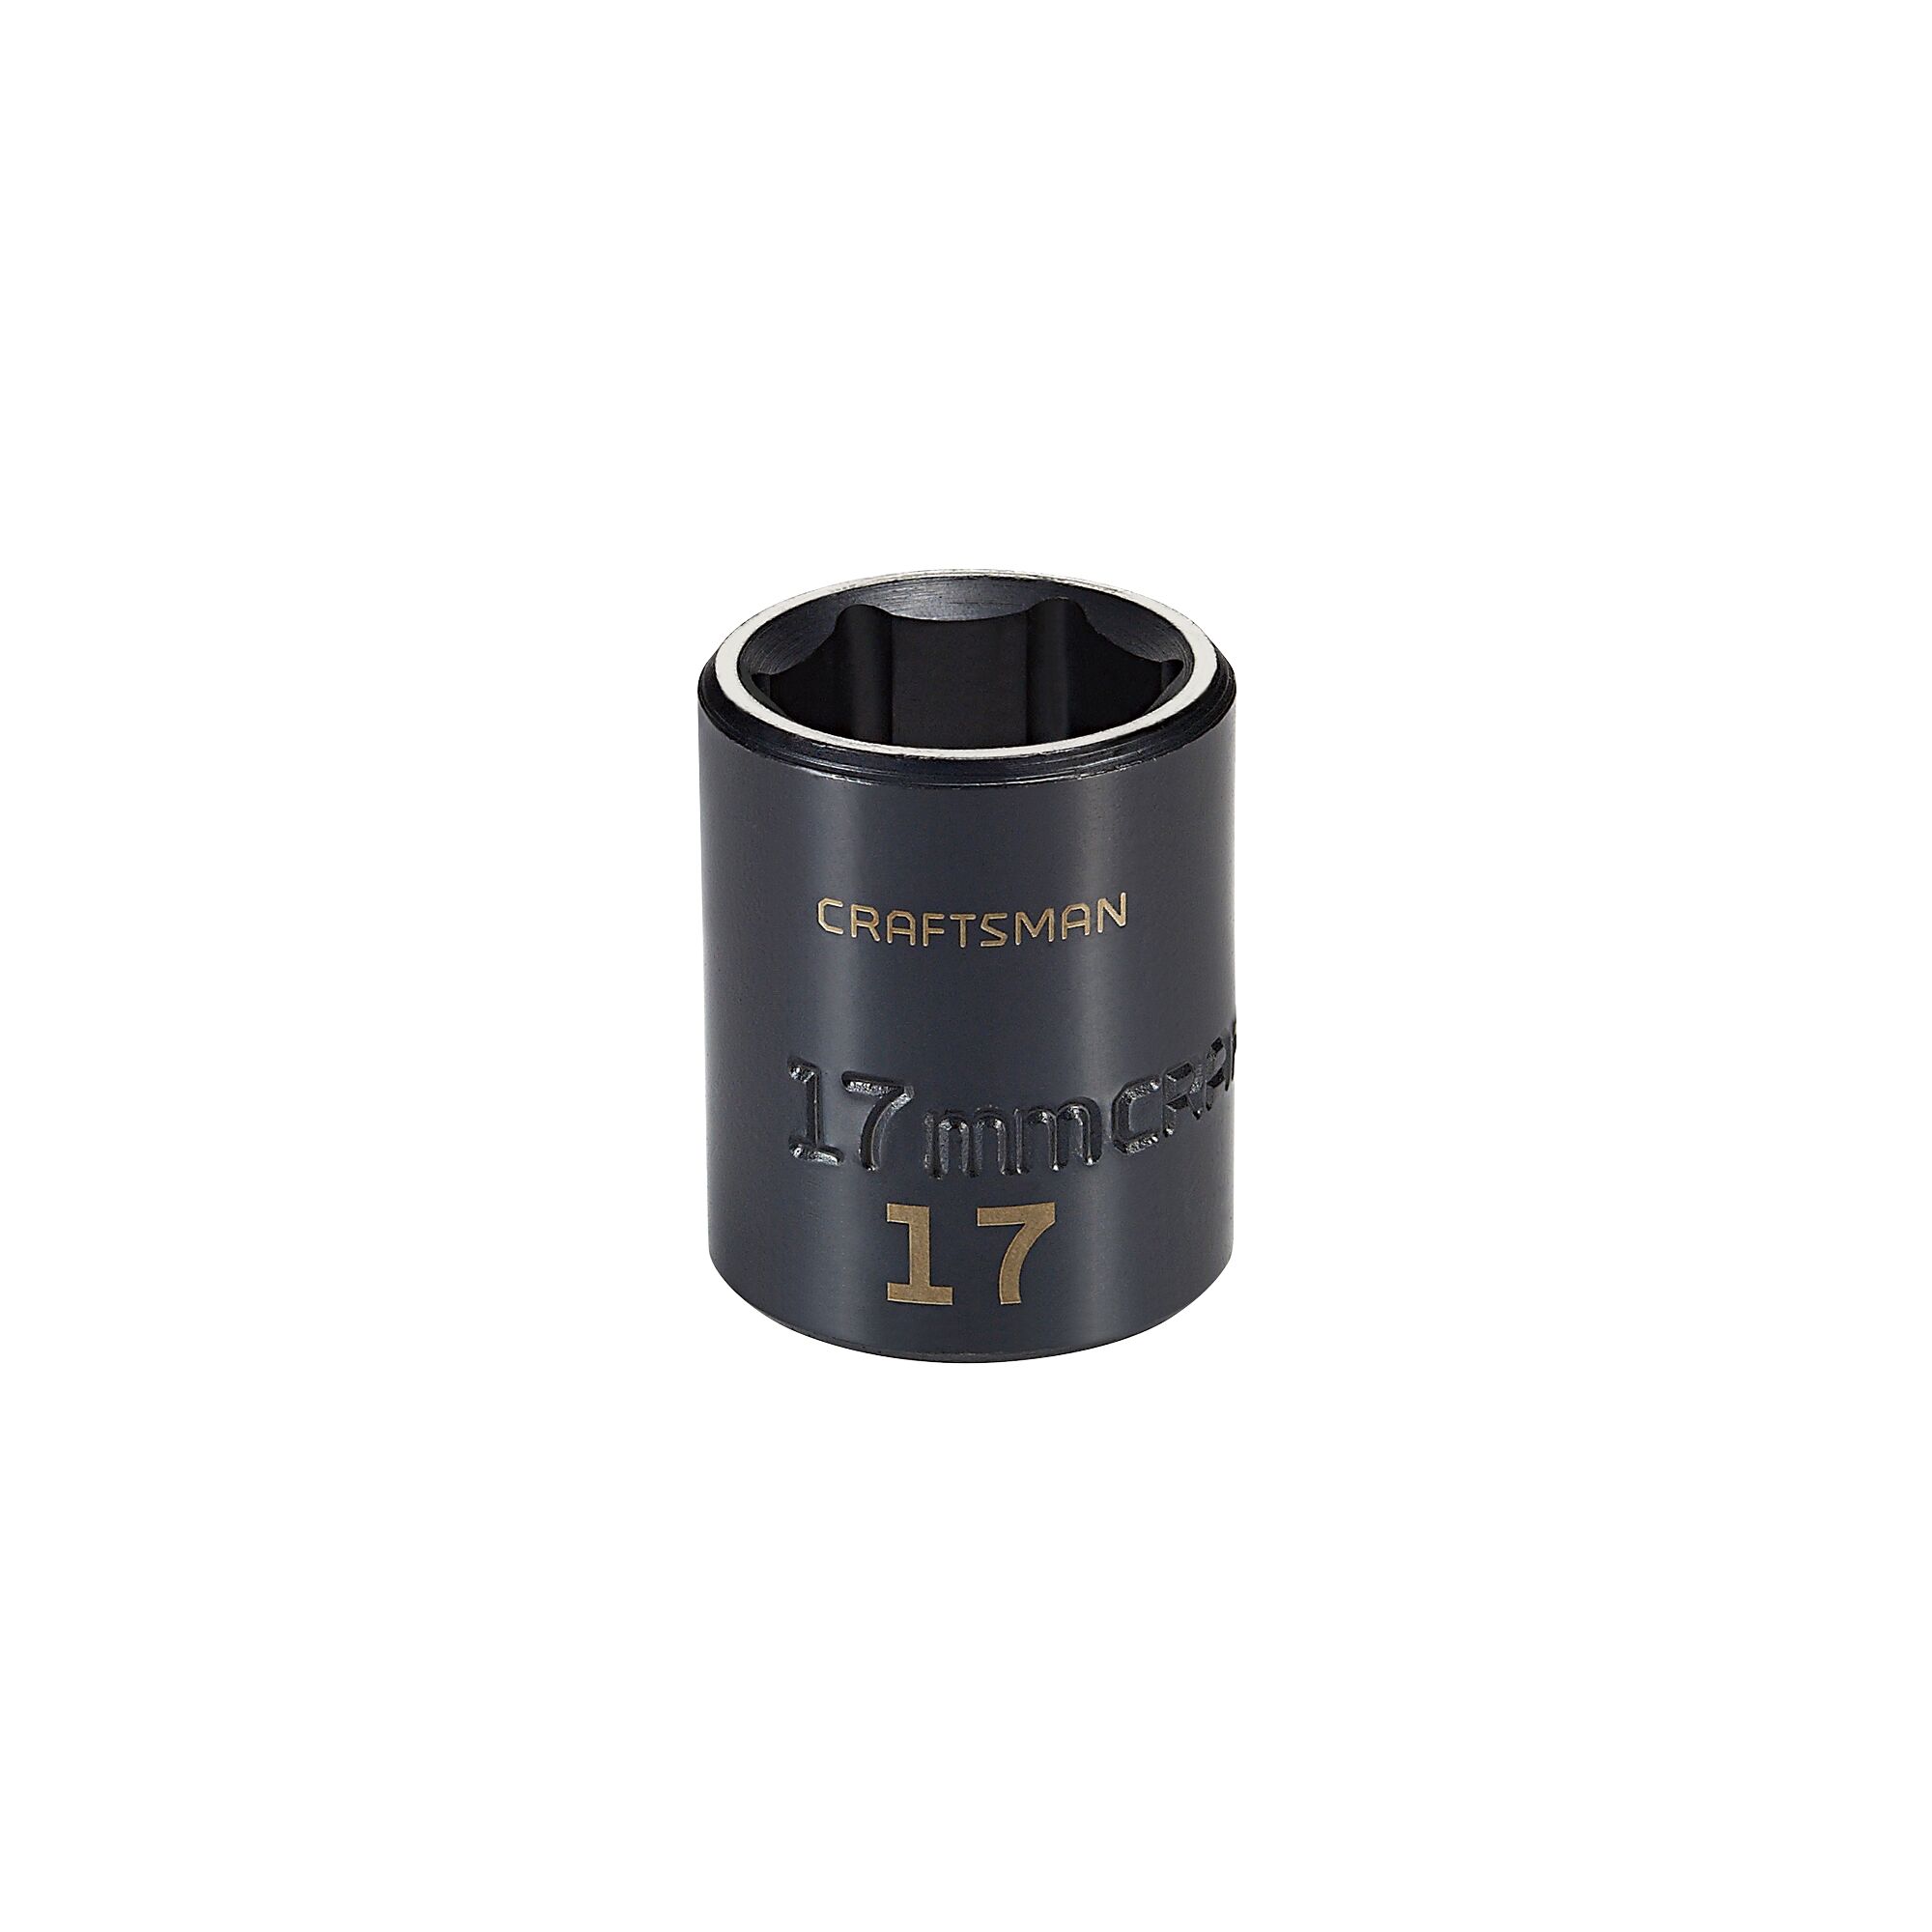 3 eighths inch 17 millimeter metric impact shallow socket.